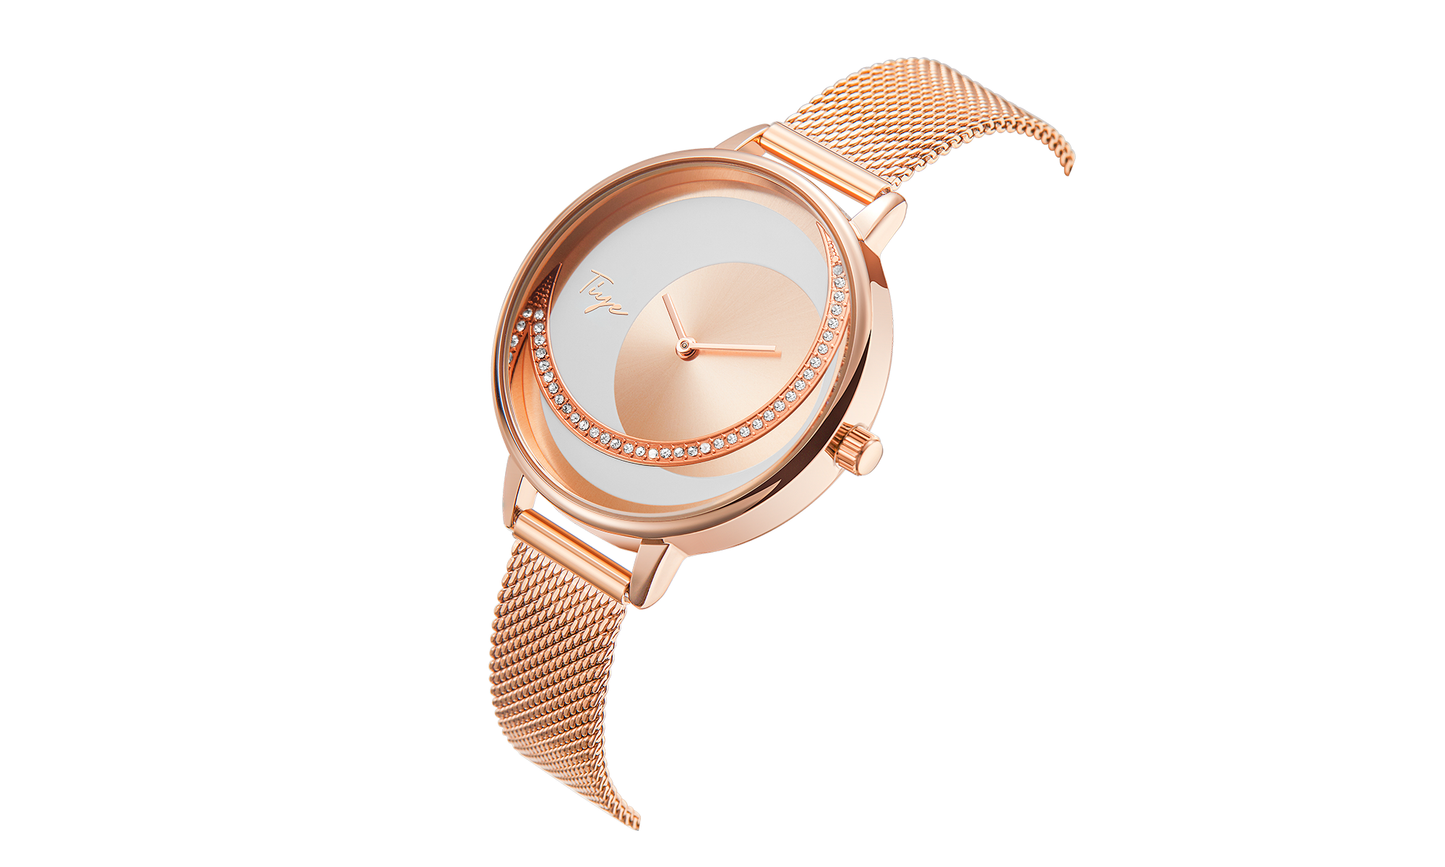 Diamond Shine
925 Sterling Silver
Rose Gold
Rhodium Plated
Affordable Jewelry
Affordable Women Watches
Affordable Women Jewelry
Affordable Women Watch Sets